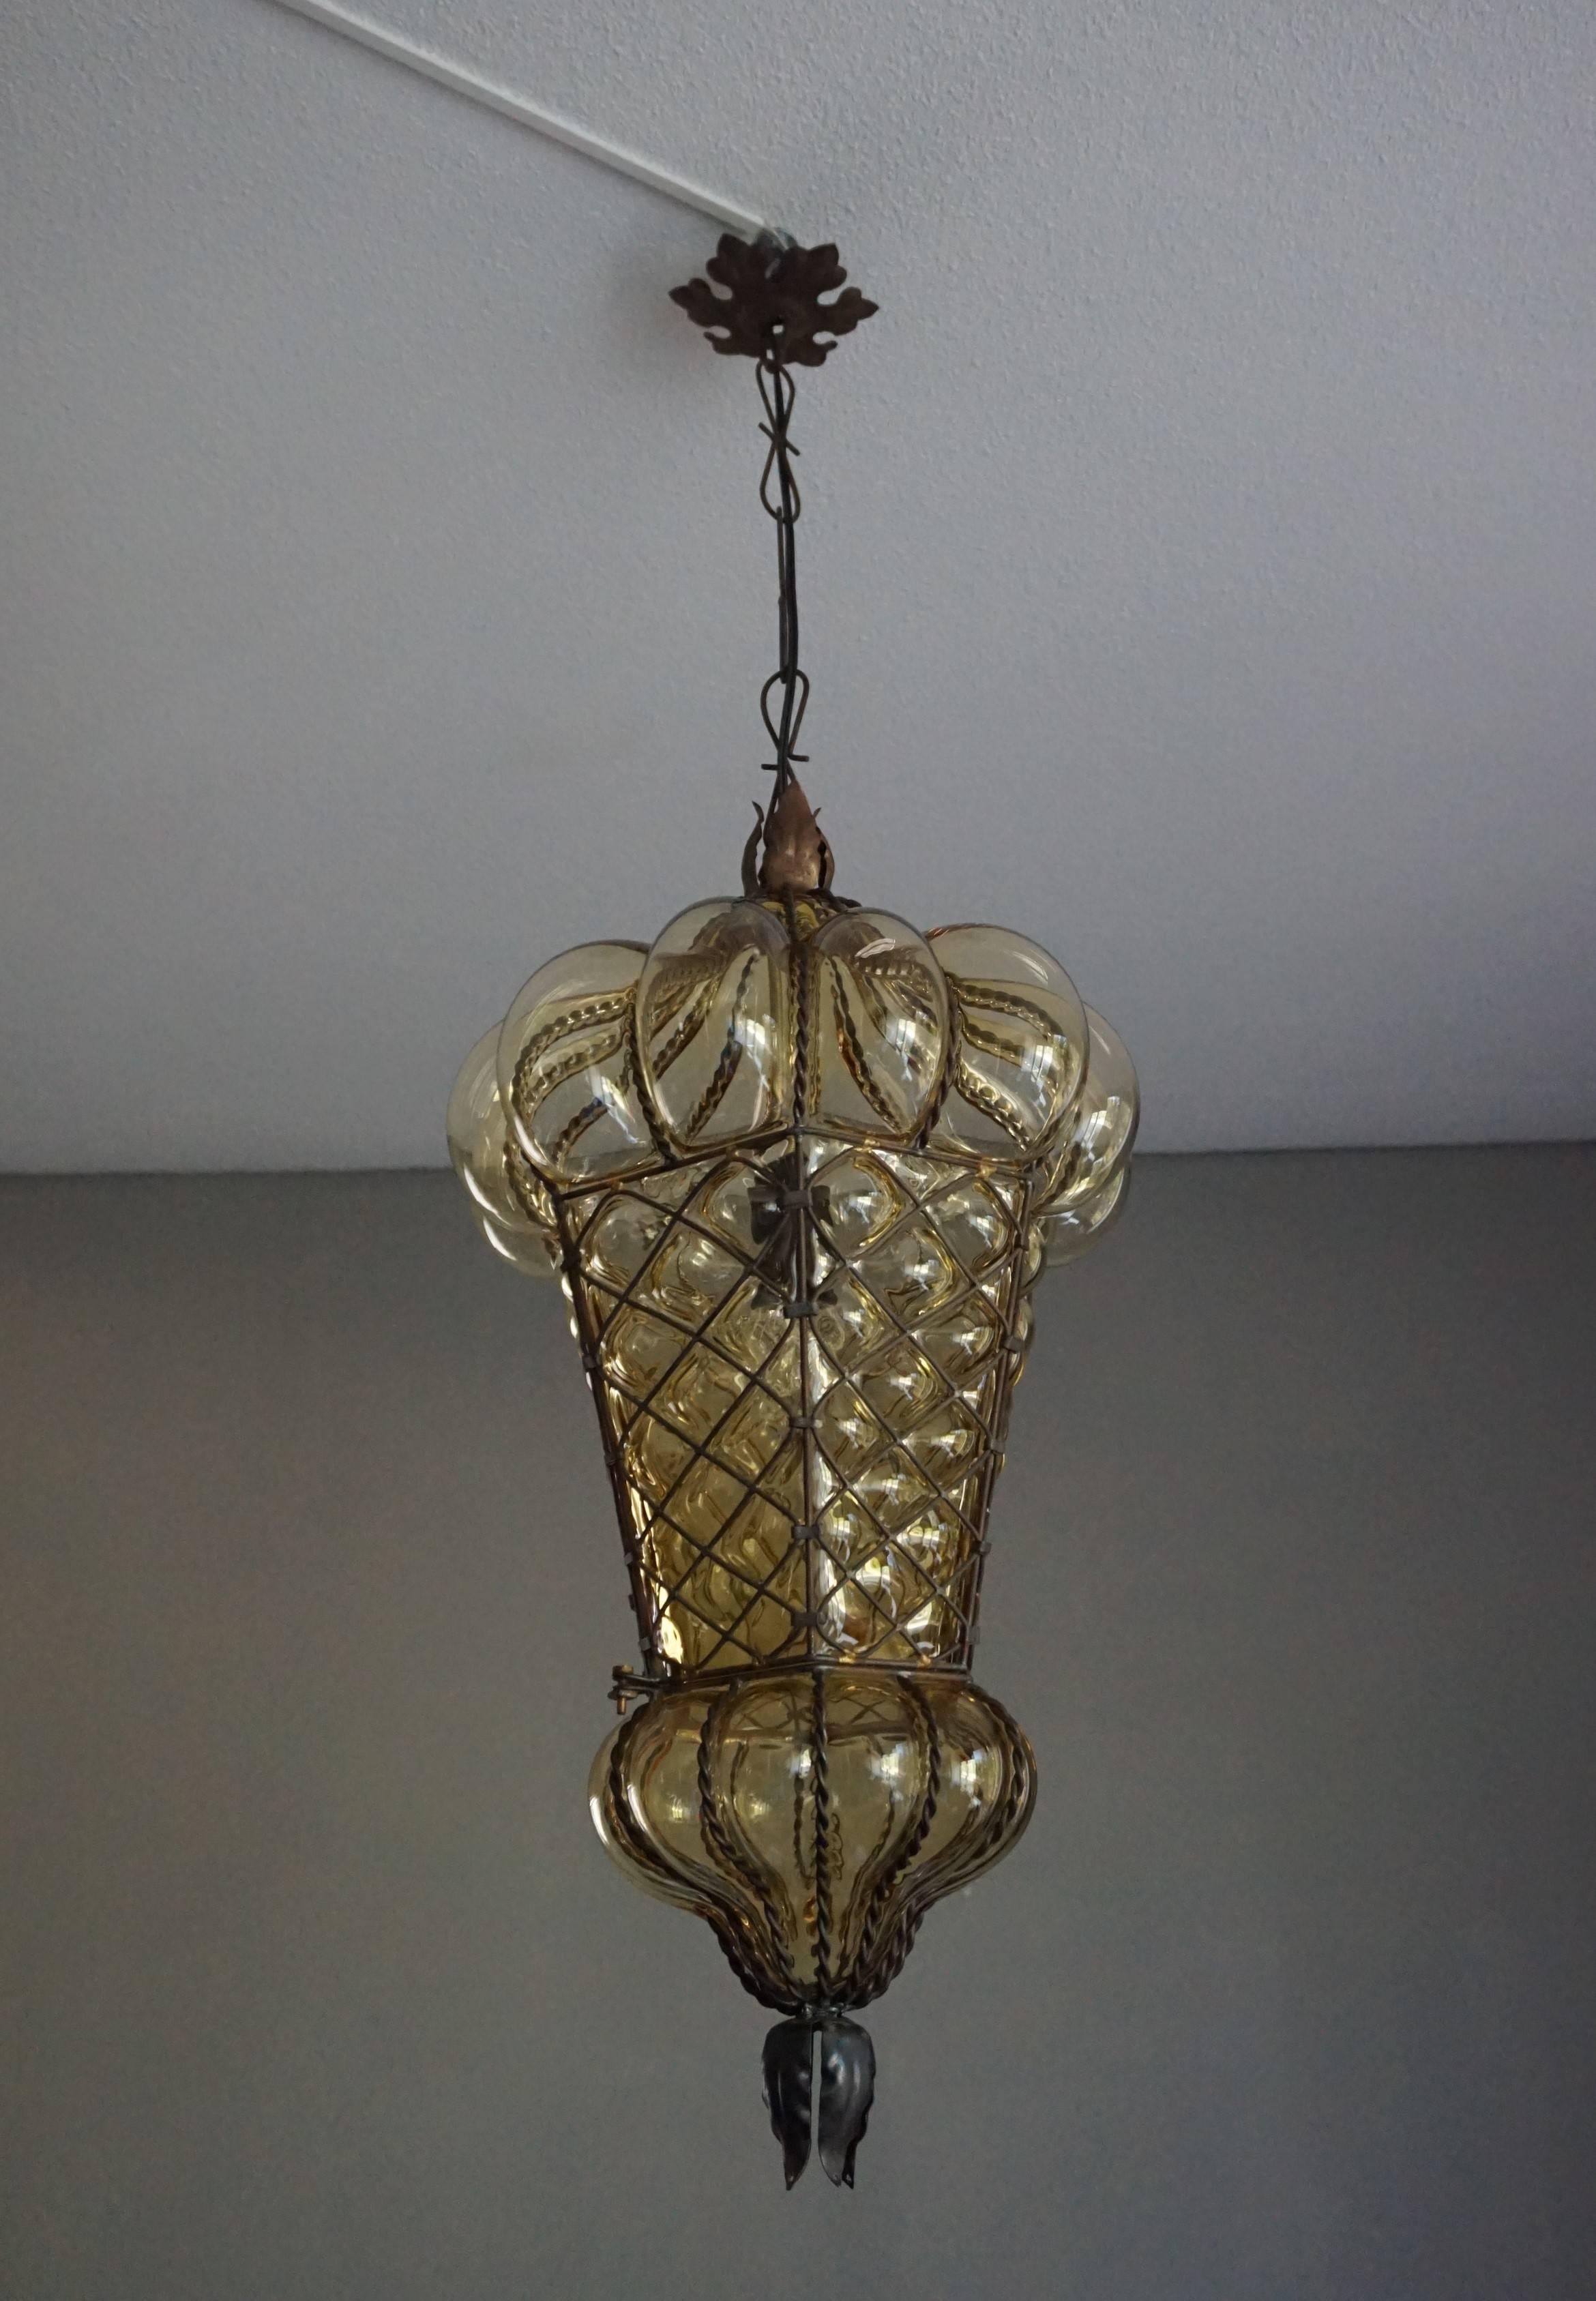 Large, amber colored and great condition Venetian light fixture.

This antique Venetian pendant is not only the largest of it's kind we ever had the pleasure of offering, it also is in exceptional condition. We have completely rewired it for safe